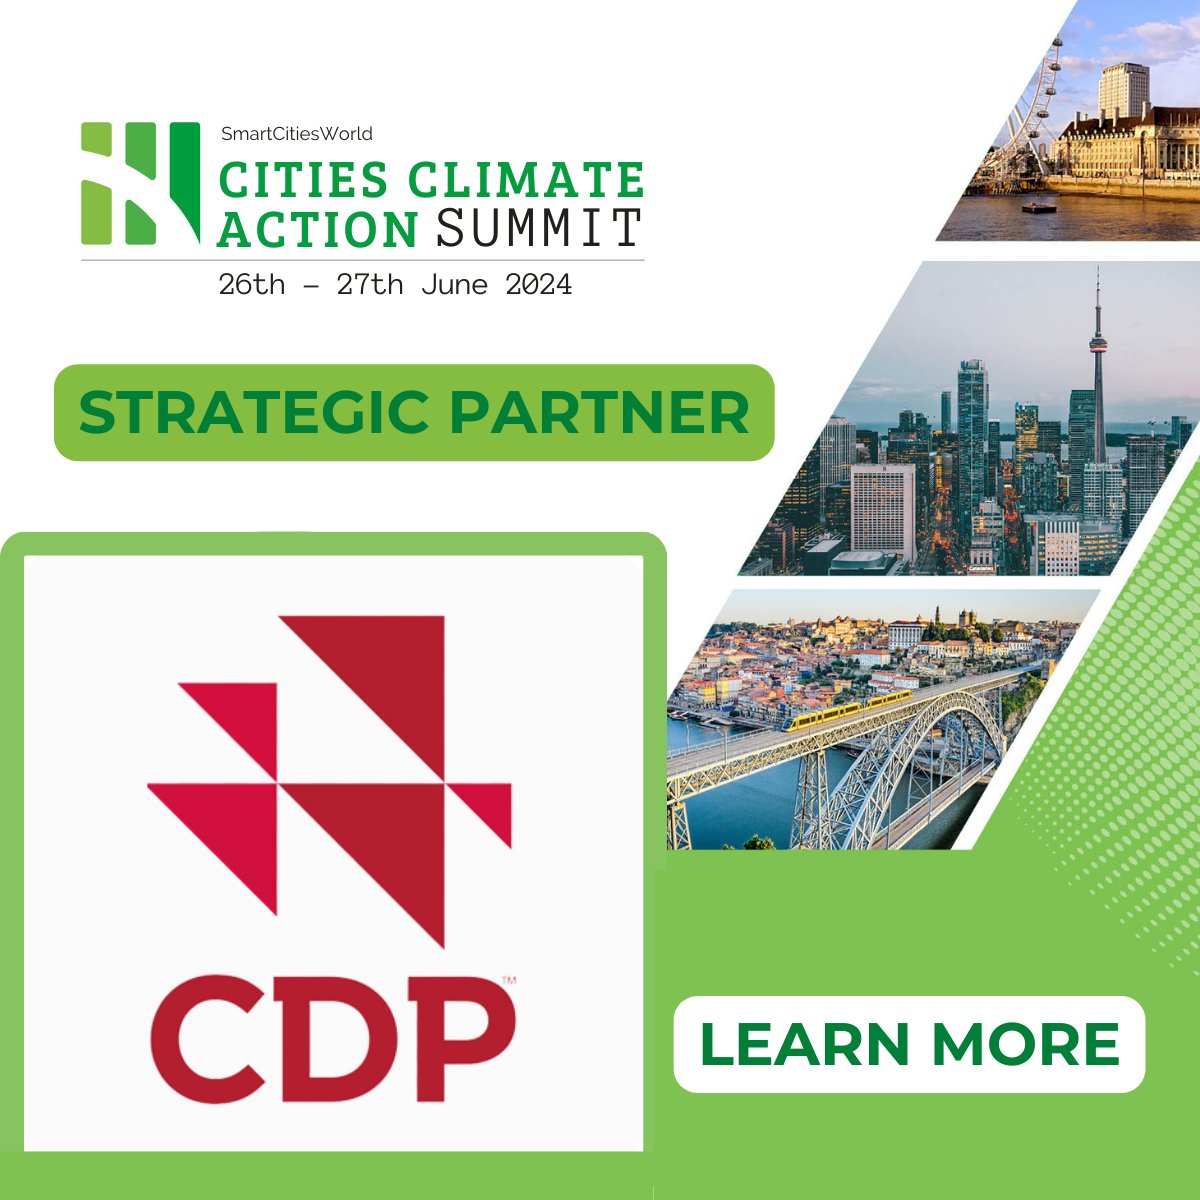 Excited to announce CDP as one of our strategic partners for this year's Cities Climate Action Summit - the only climate action event dedicated to addressing the climate issues facing the worlds cities. Partner with us smartcitiesworld.net/get-involved #CCAS2024 #CDP